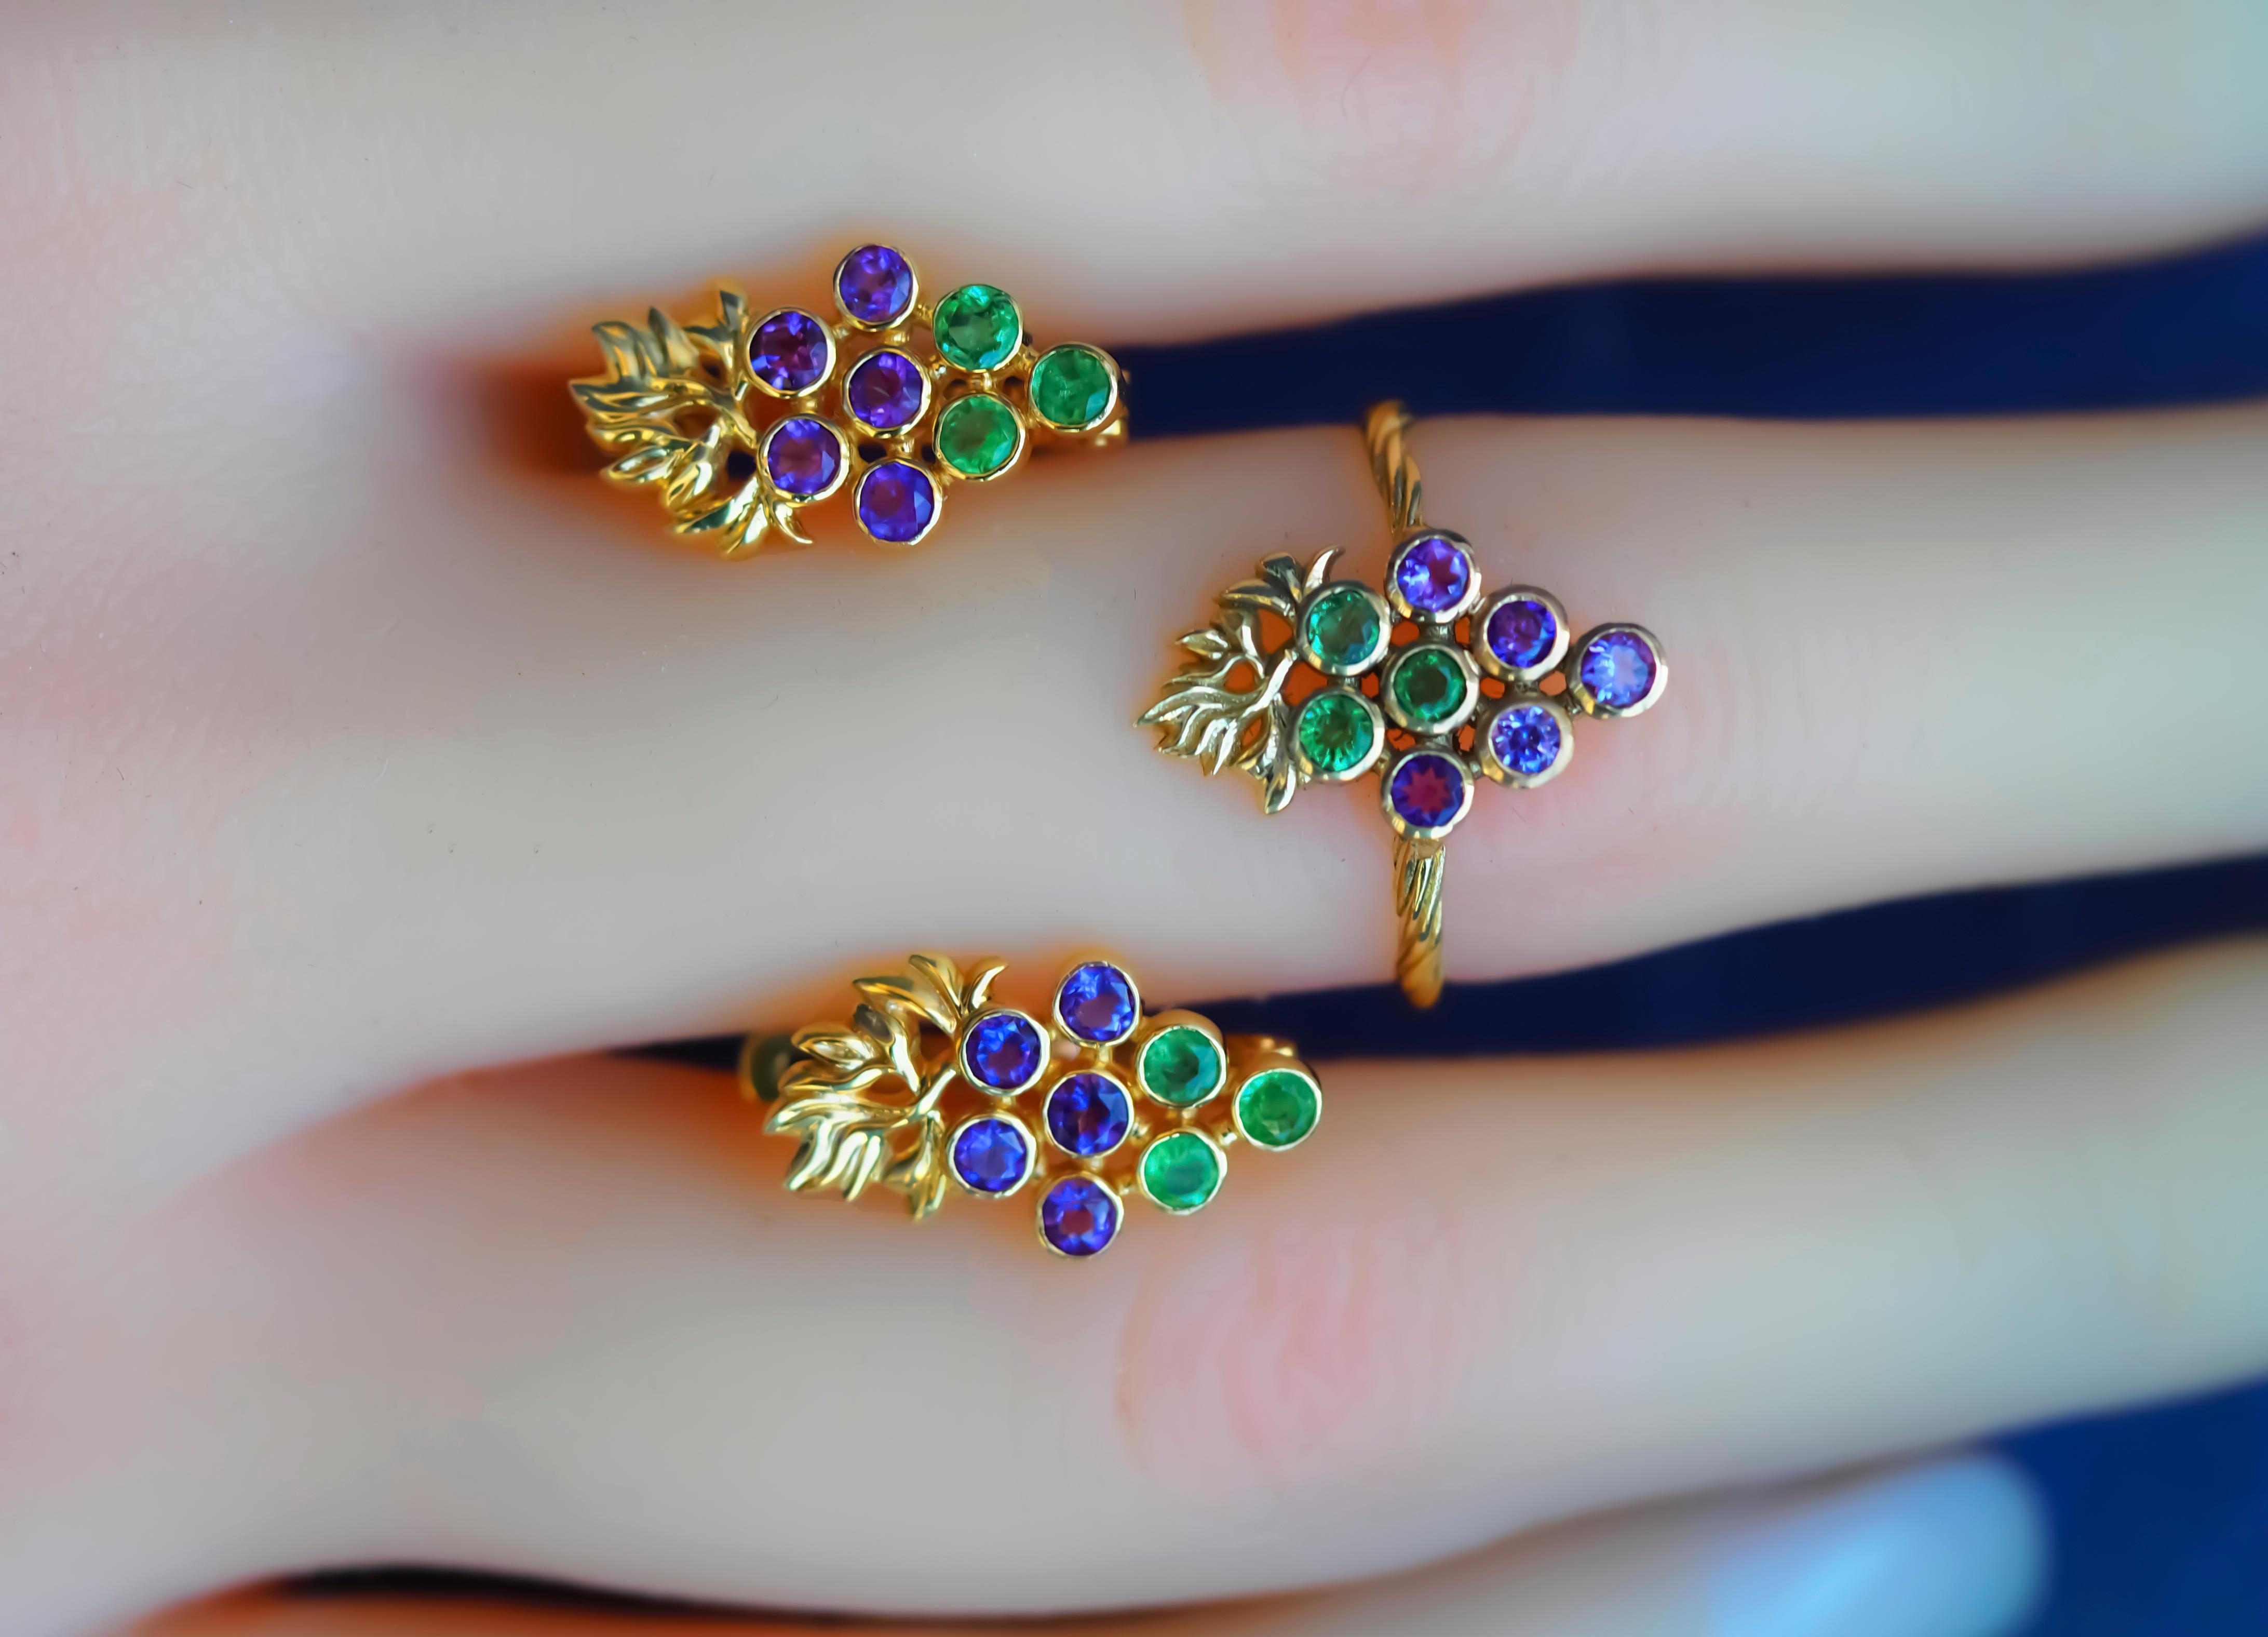 Emerald and amethyst set: ring and earrings in 14k gold.  Grape ring and earrings. Emerald earrings and ring.  Amethyst earrings and ring. 

Total weight - 5 gr

Earrings

Weight: 3.1 g.
Size:17.5 x 10 mm.
14k gold
Gemstones:
Natural emeralds: 6